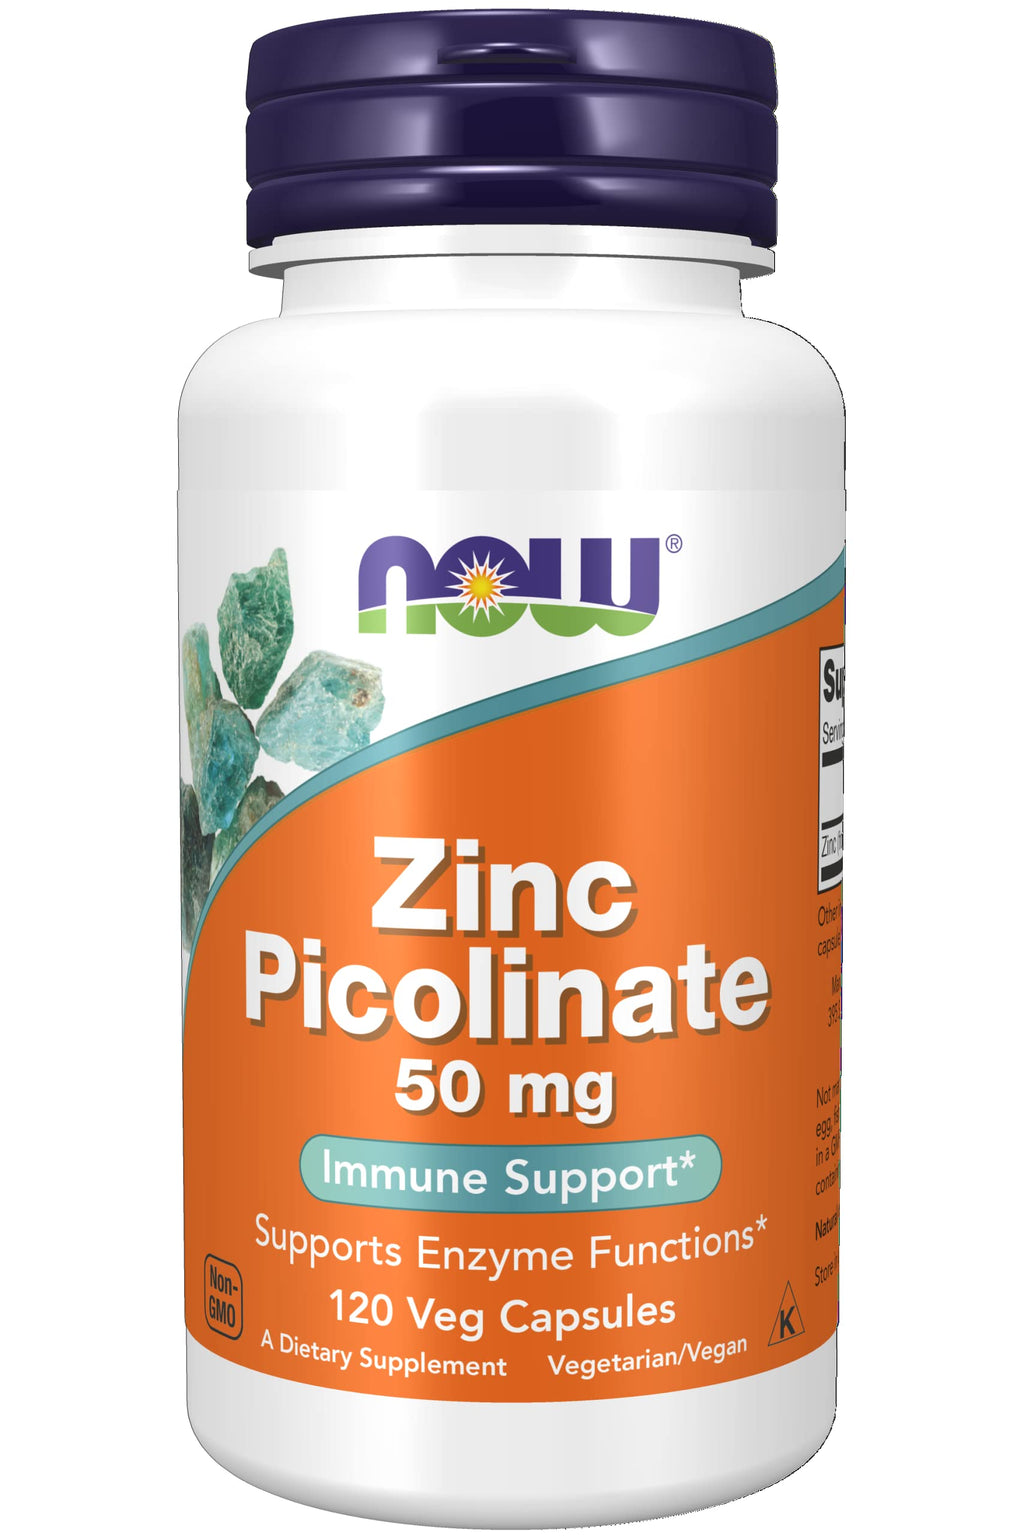 [Australia] - NOW Supplements, Zinc Picolinate 50 mg, Supports Enzyme Functions*, Immune Support*, 120 Veg Capsules 120 Count (Pack of 1) 